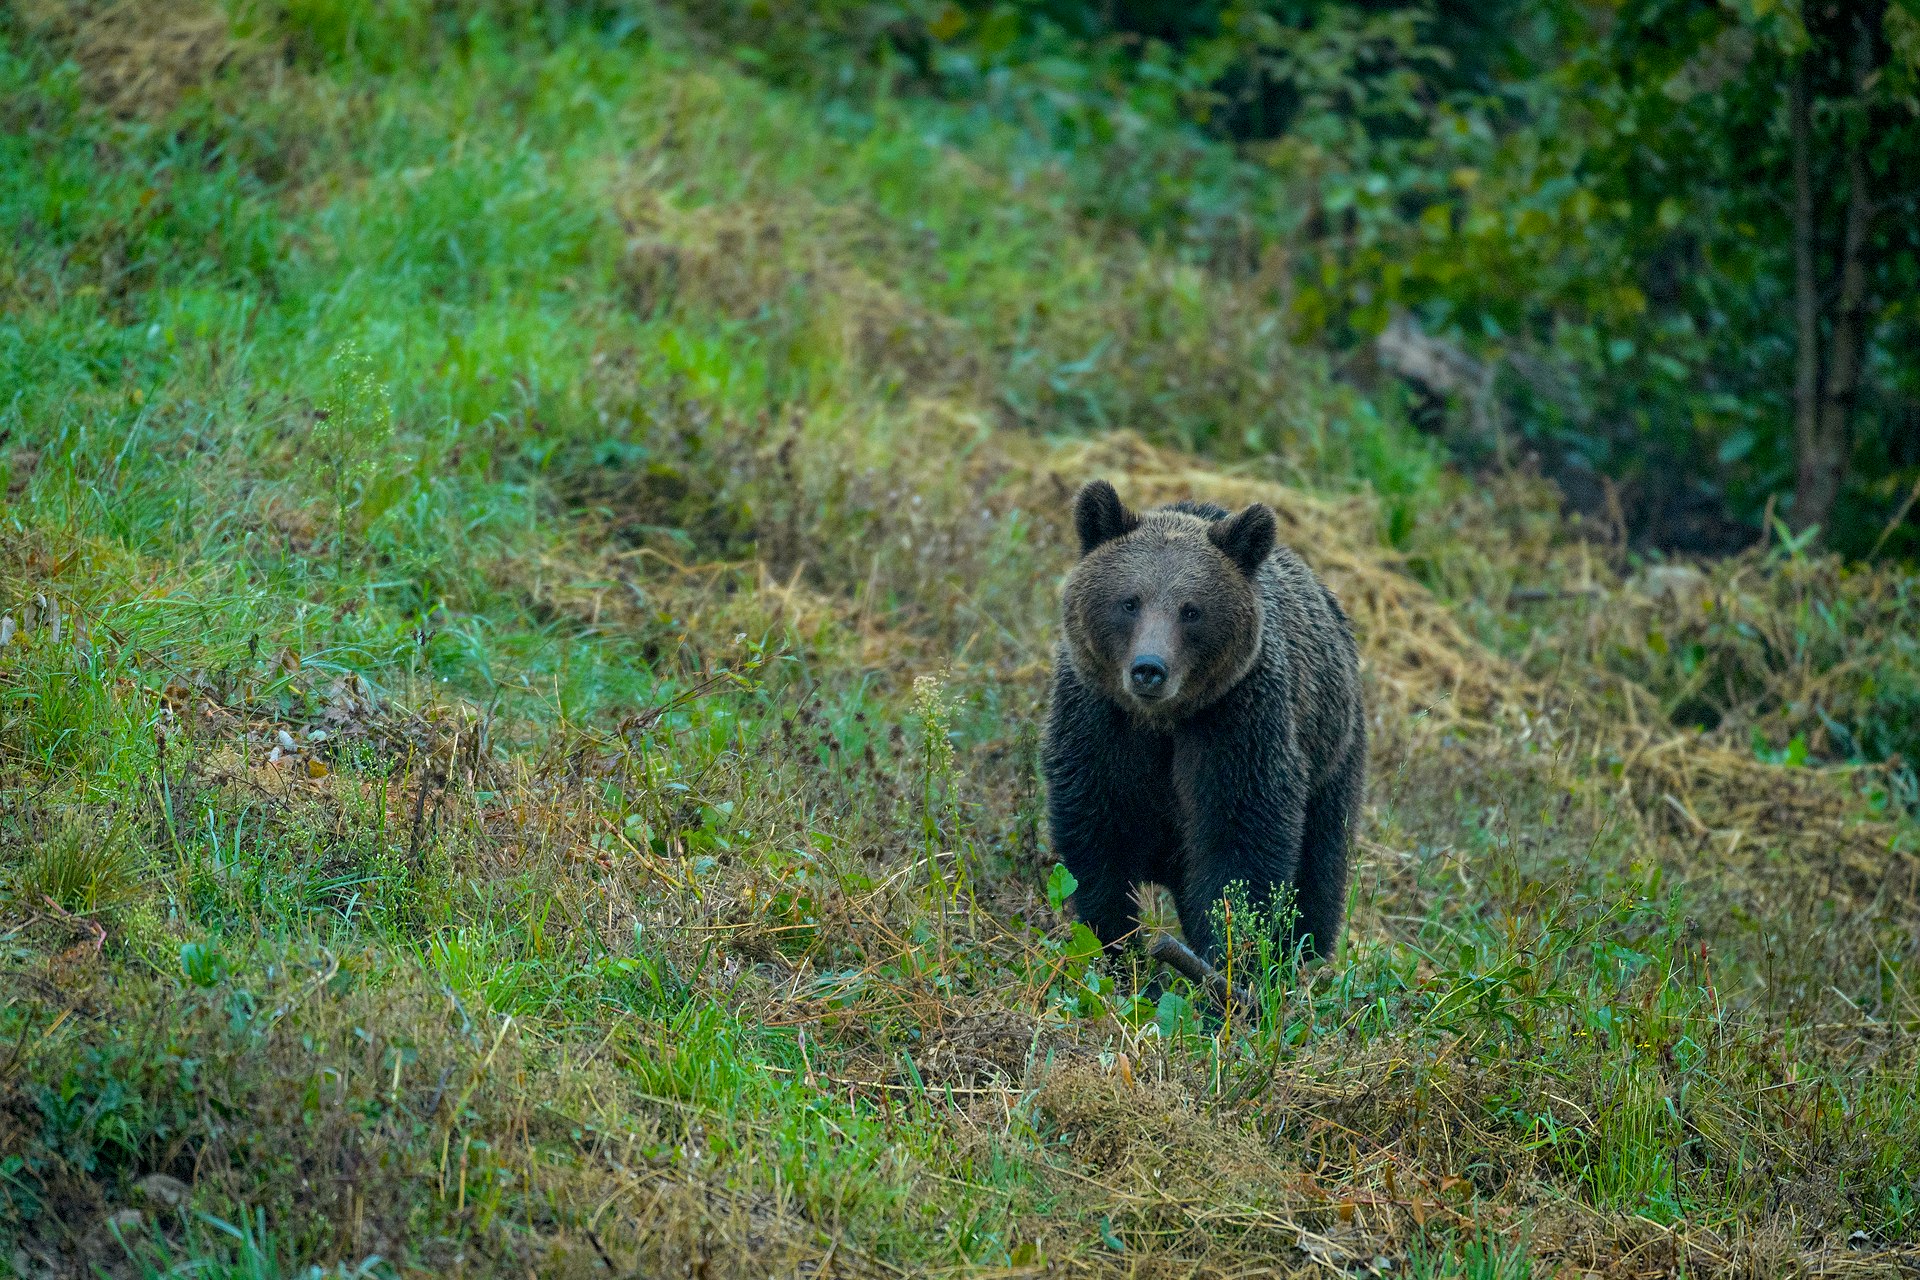 A brown bear walks towards the camera in low scrub bush on a steep slope.